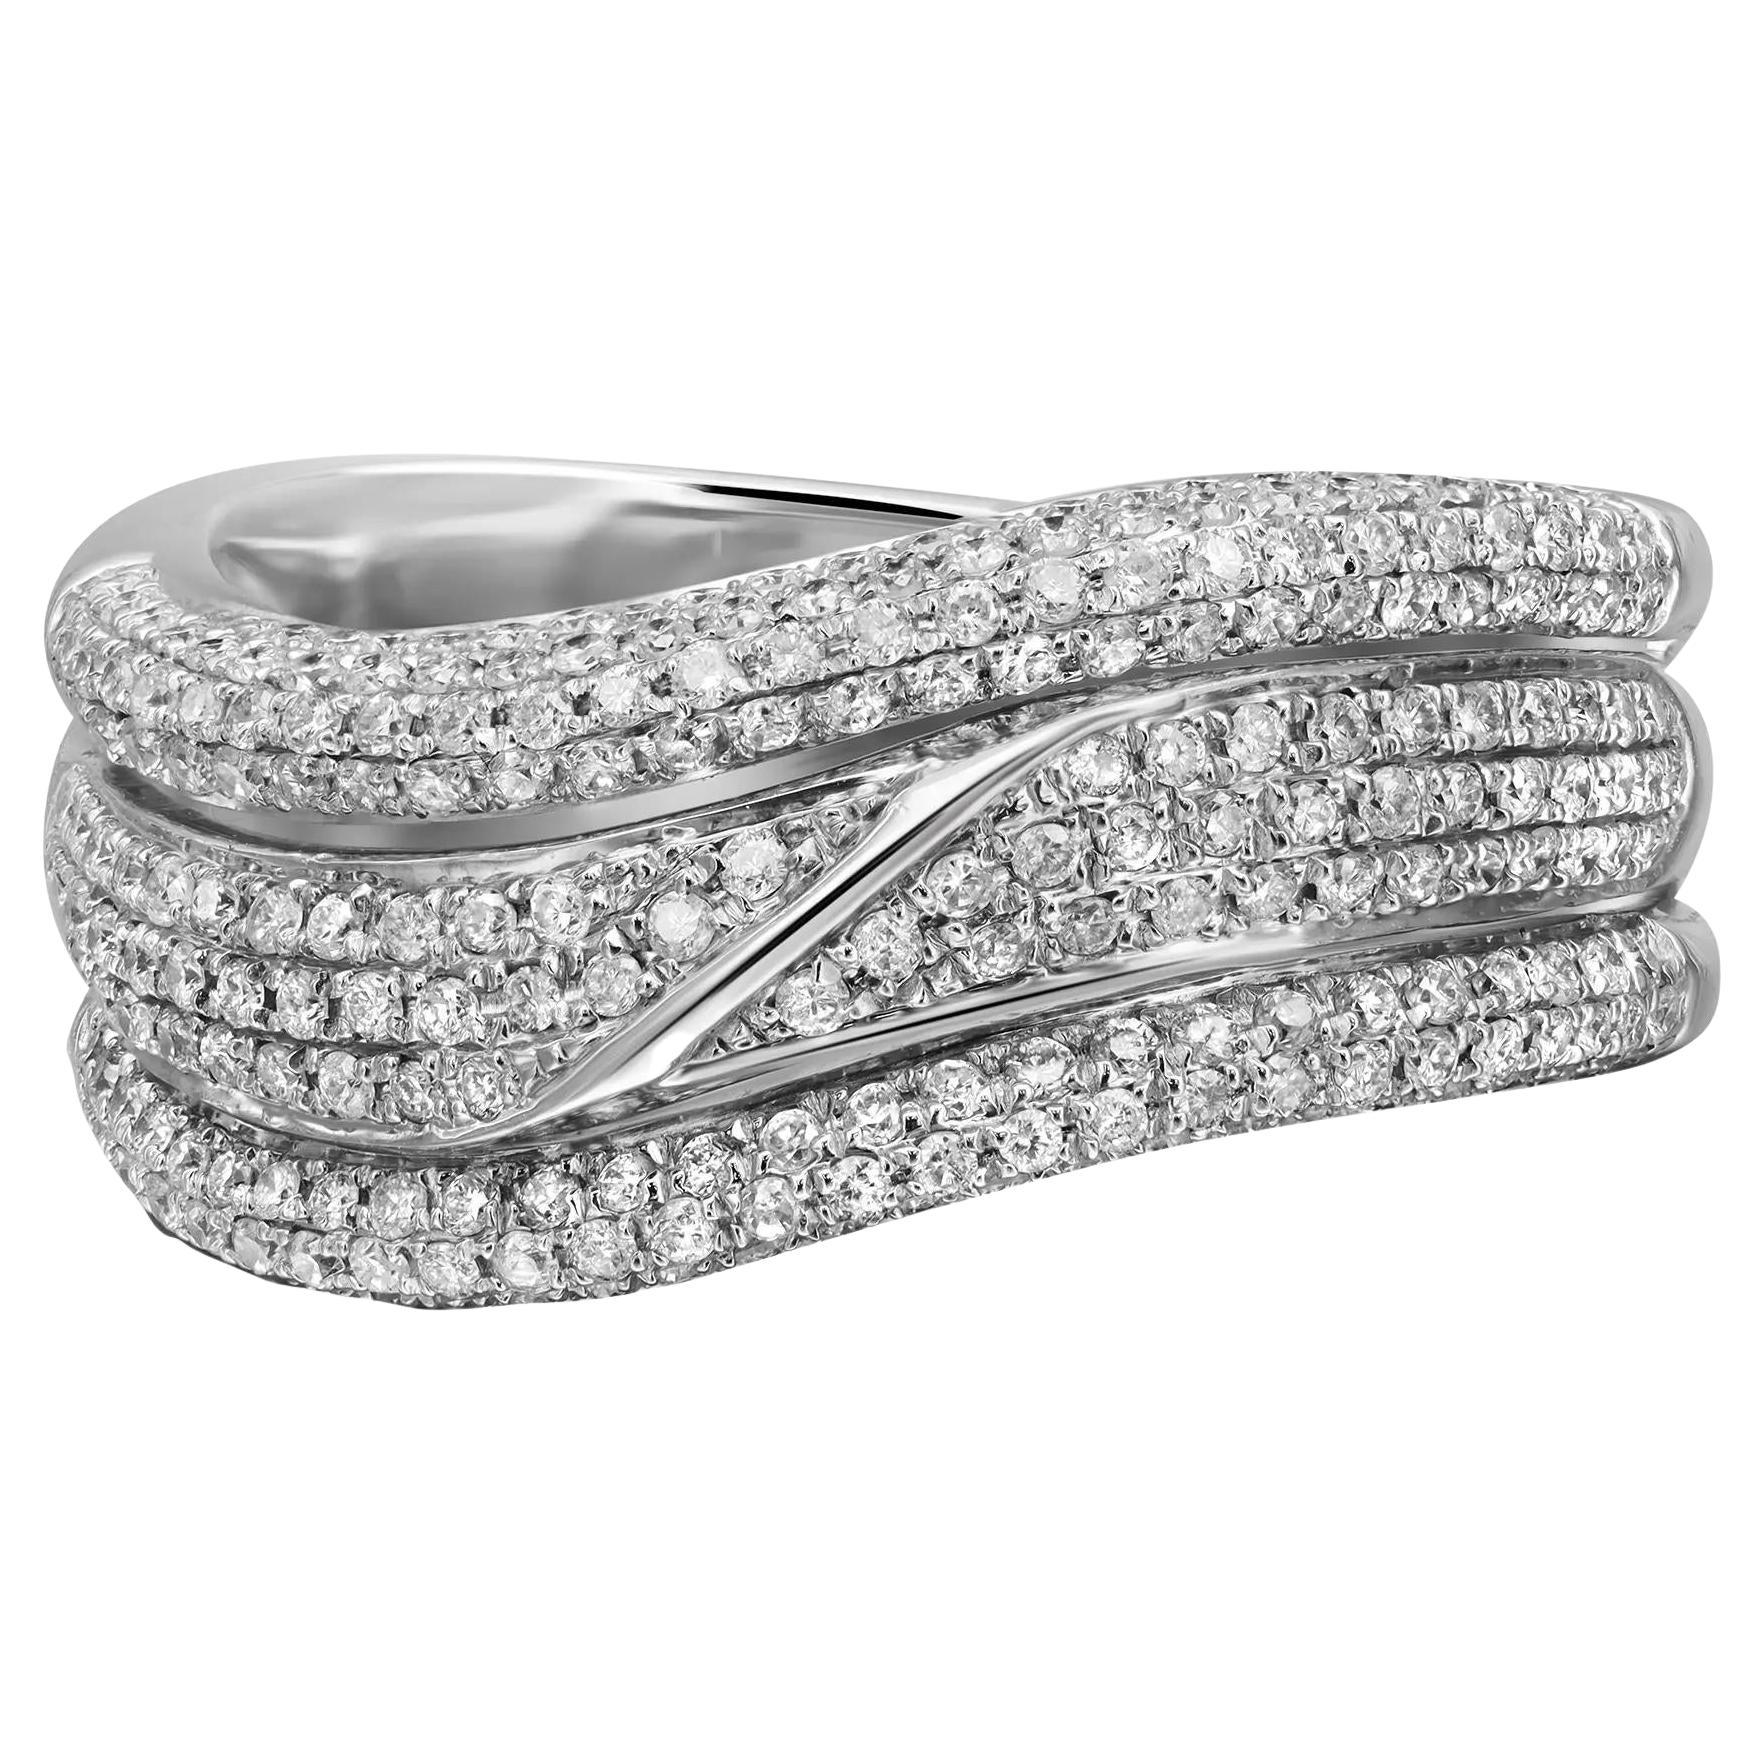 0.75cttw Pave Set Round Cut Diamond Band Ring 14k White Gold For Sale